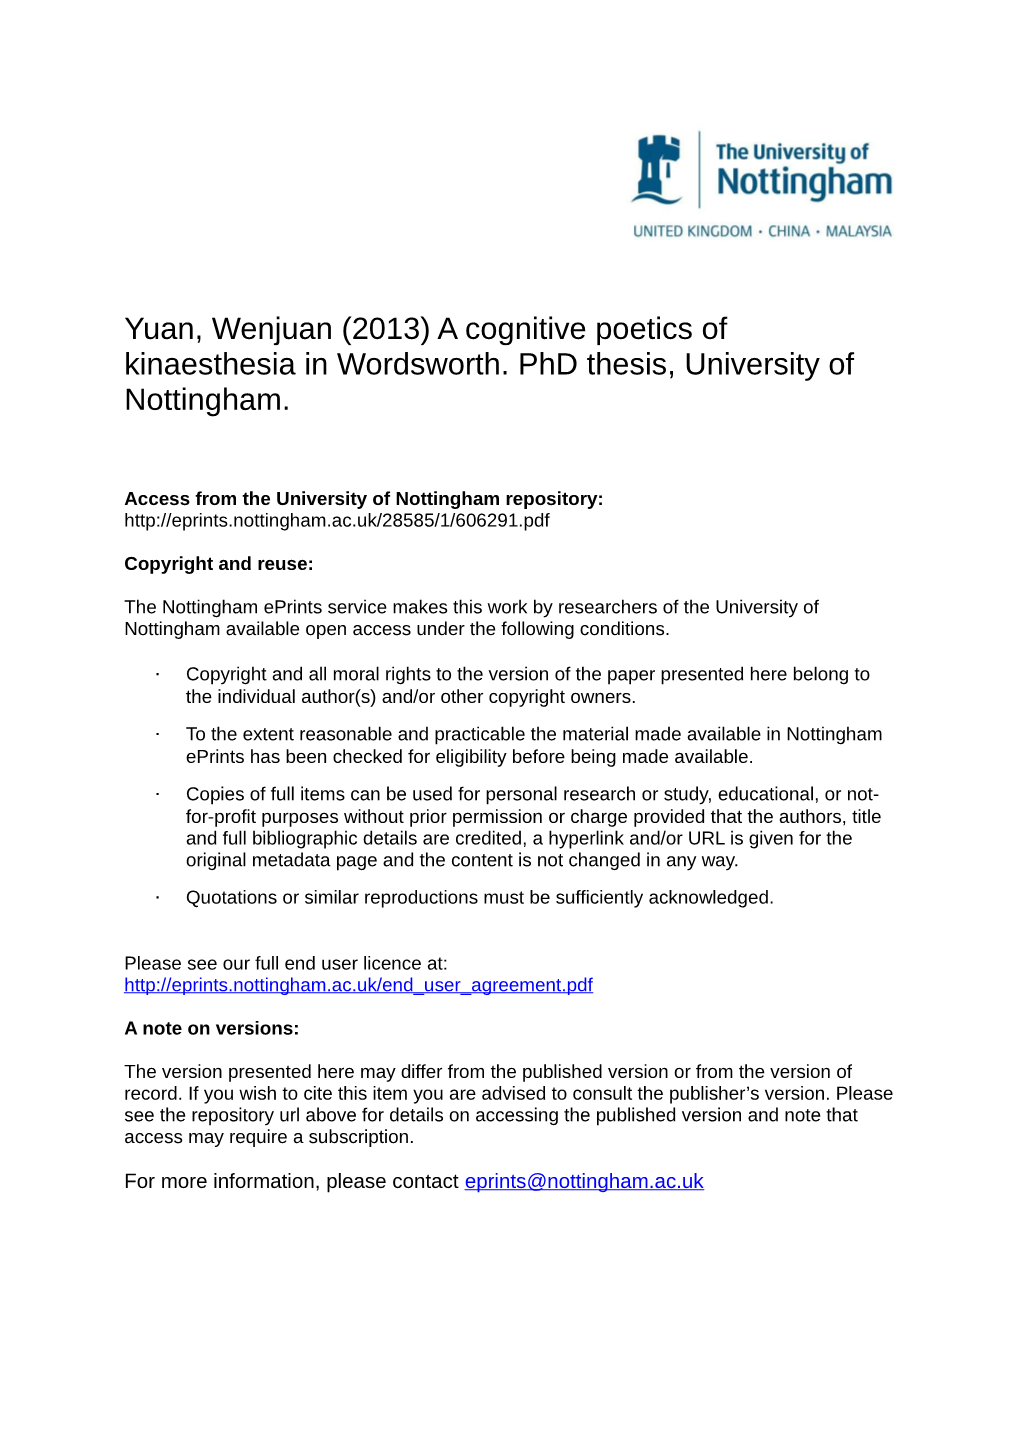 A Cognitive Poetics of Kinaesthesia in Wordsworth. Phd Thesis, University of Nottingham